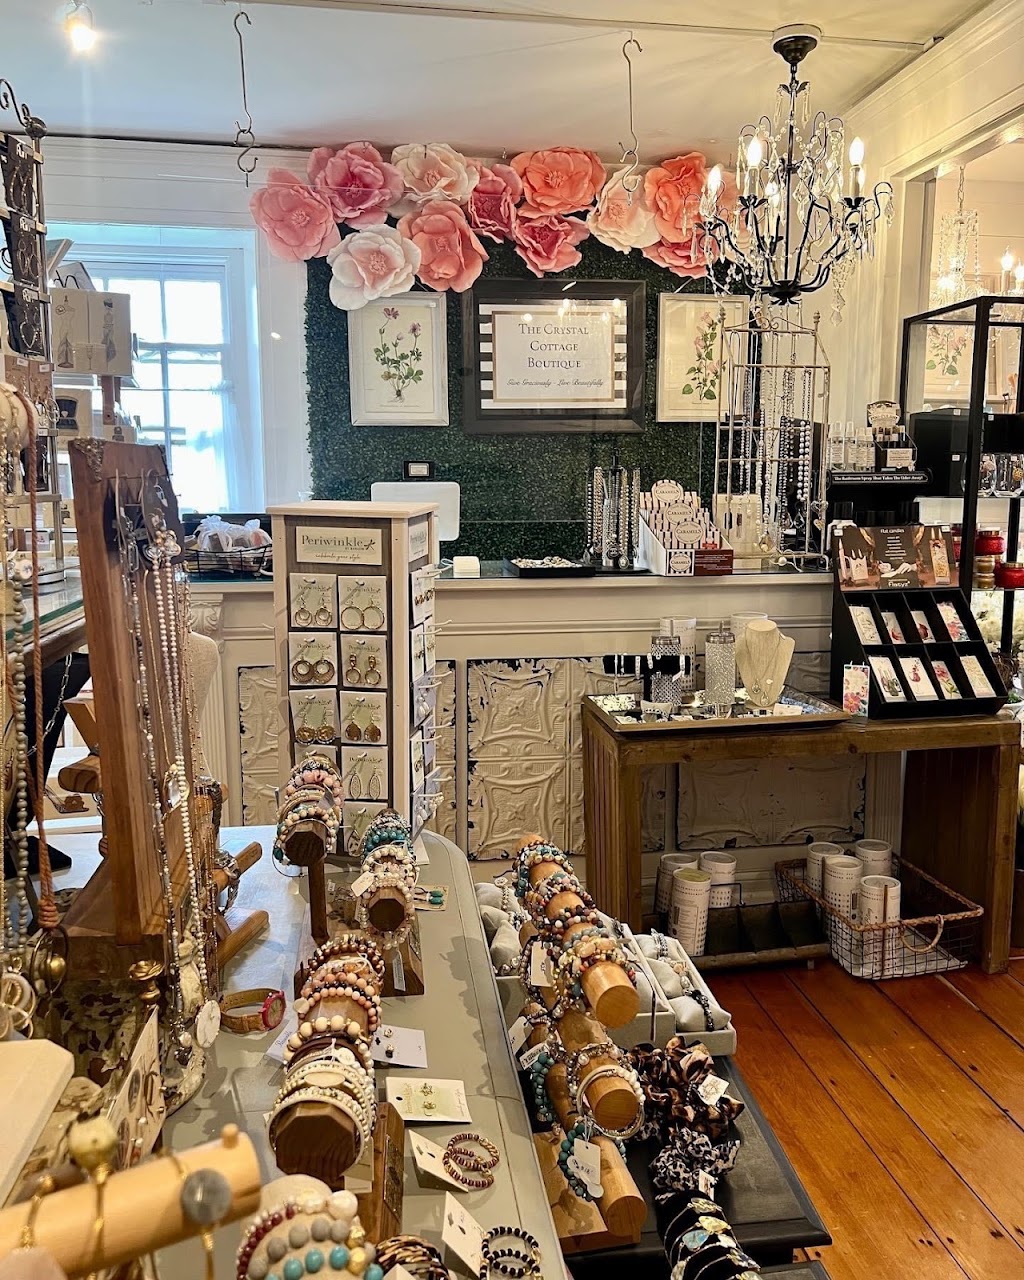 The Crystal Cottage Boutique | Carousel Village - The Farmhouse, 591 Durham Rd, George School, PA 18940 | Phone: (267) 491-5582